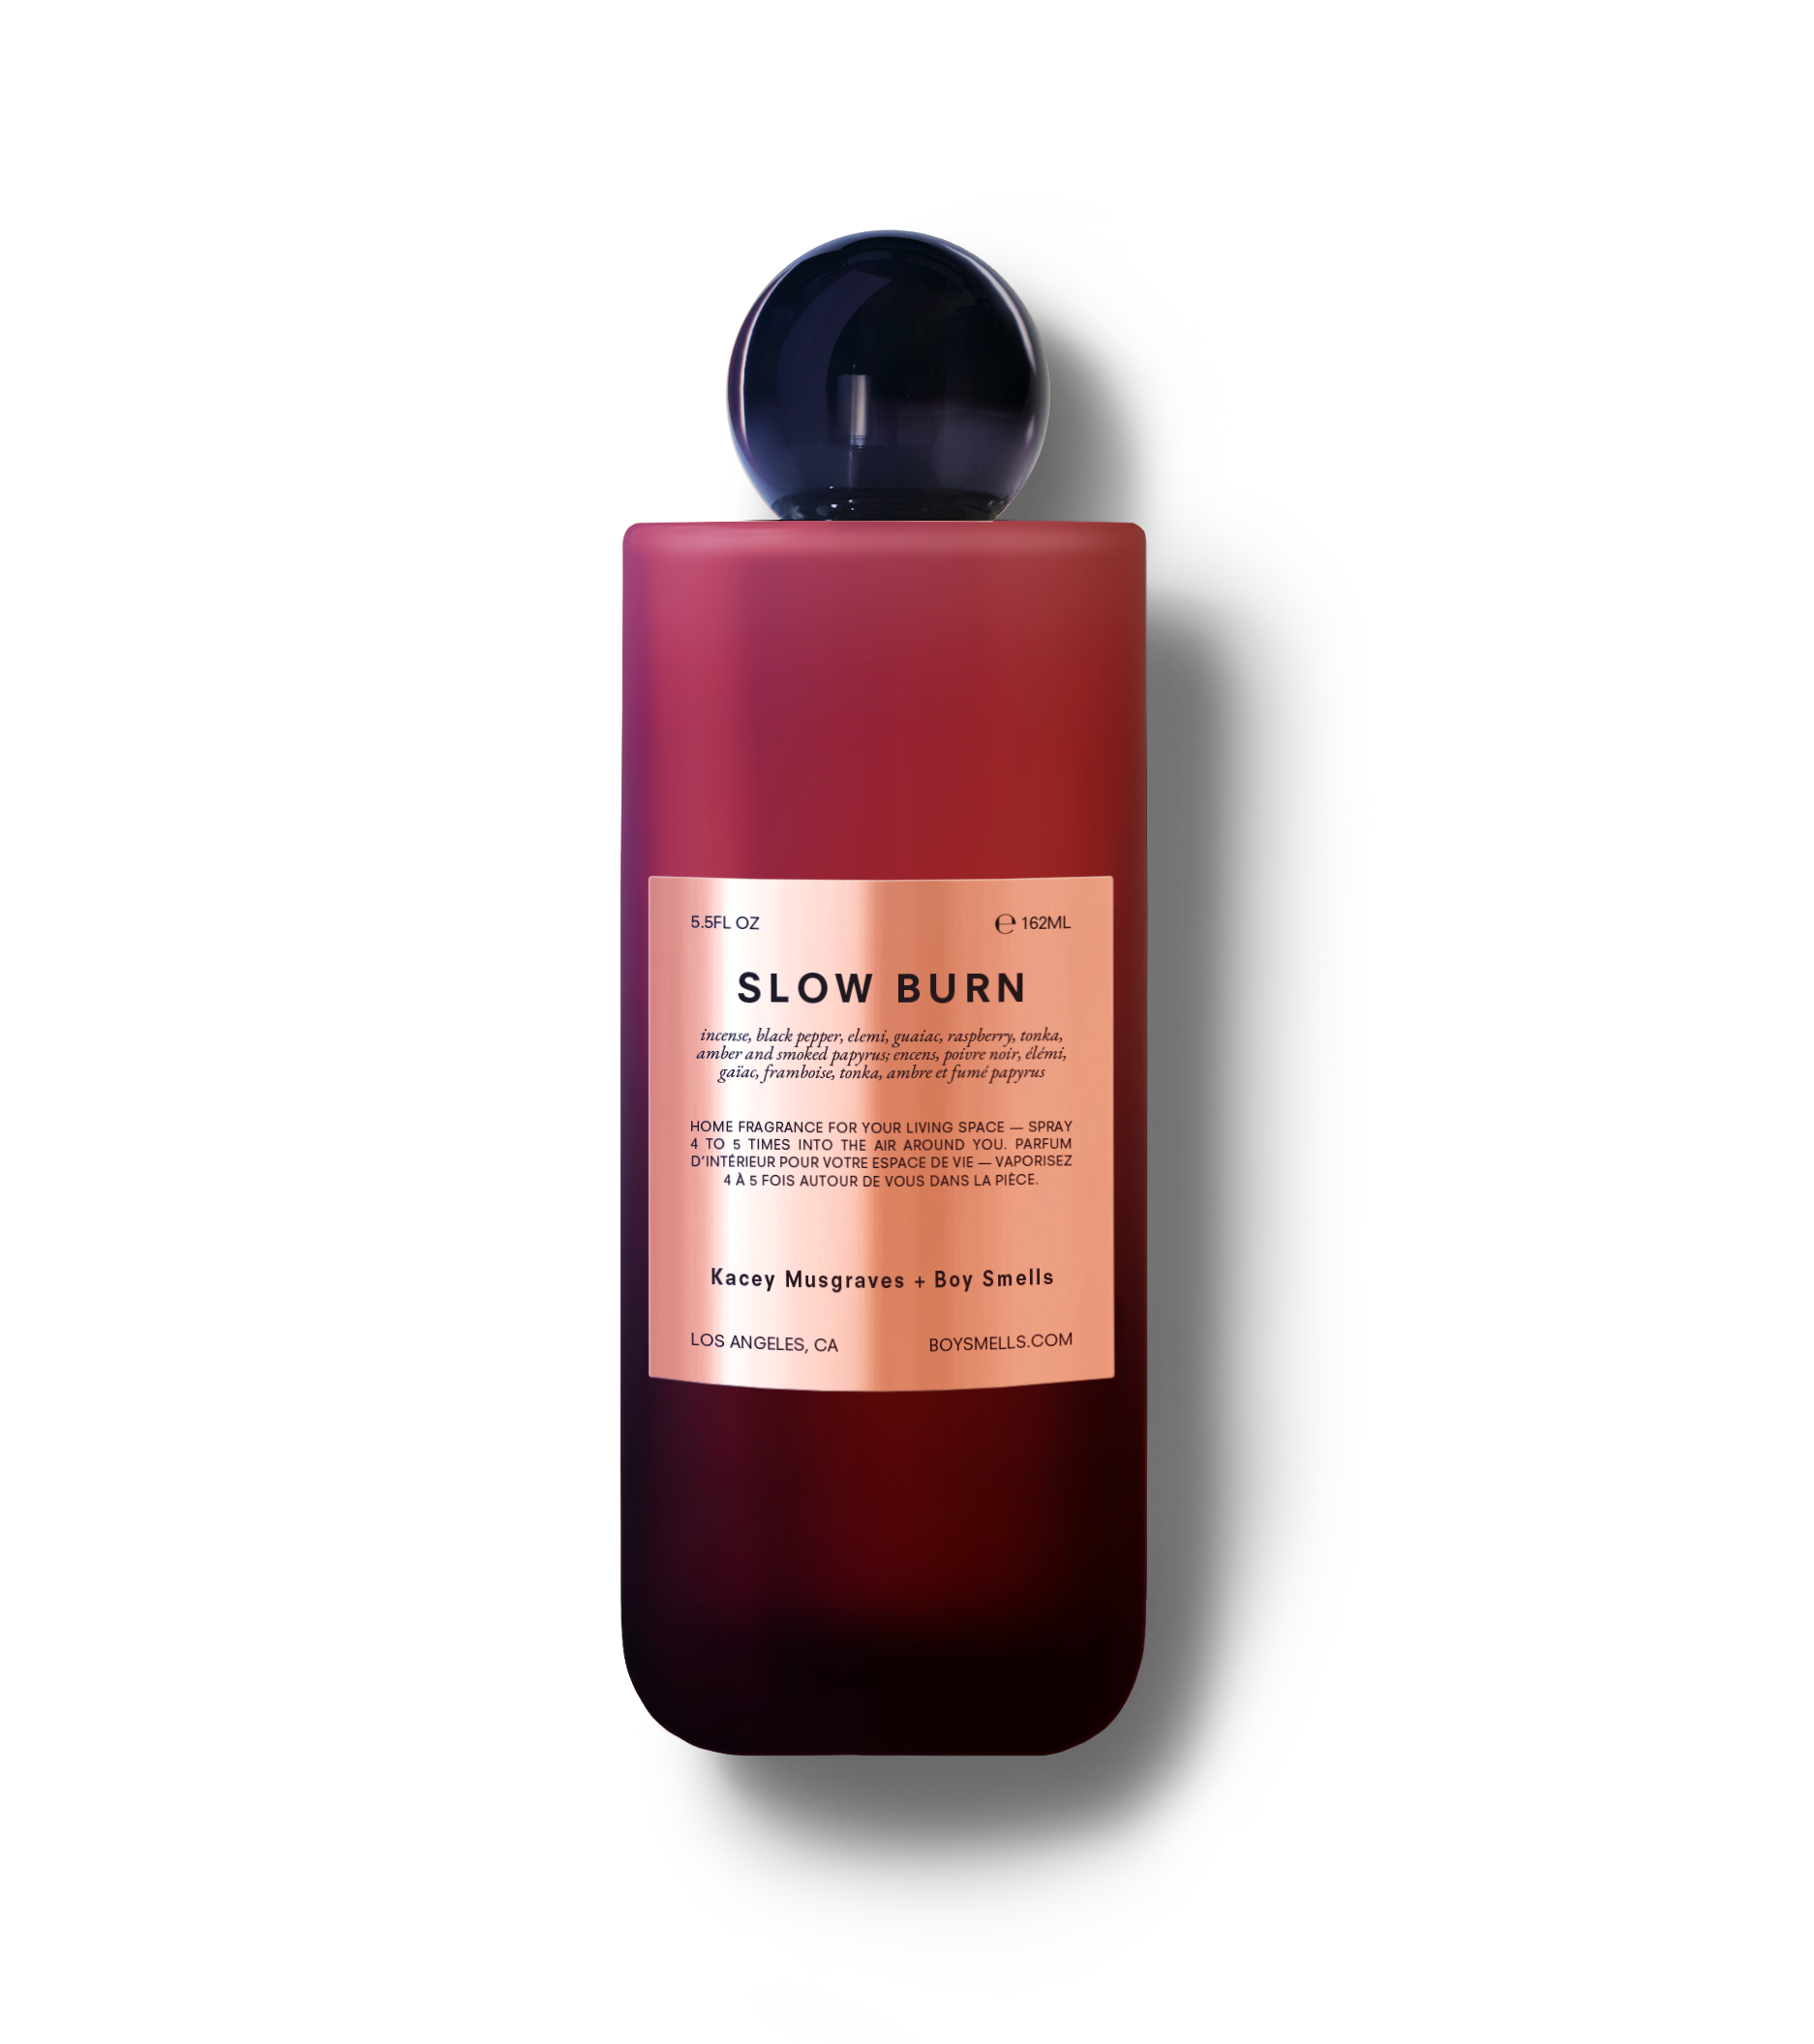 Slow Burn Scented Room Spray of Kacey Musgraves